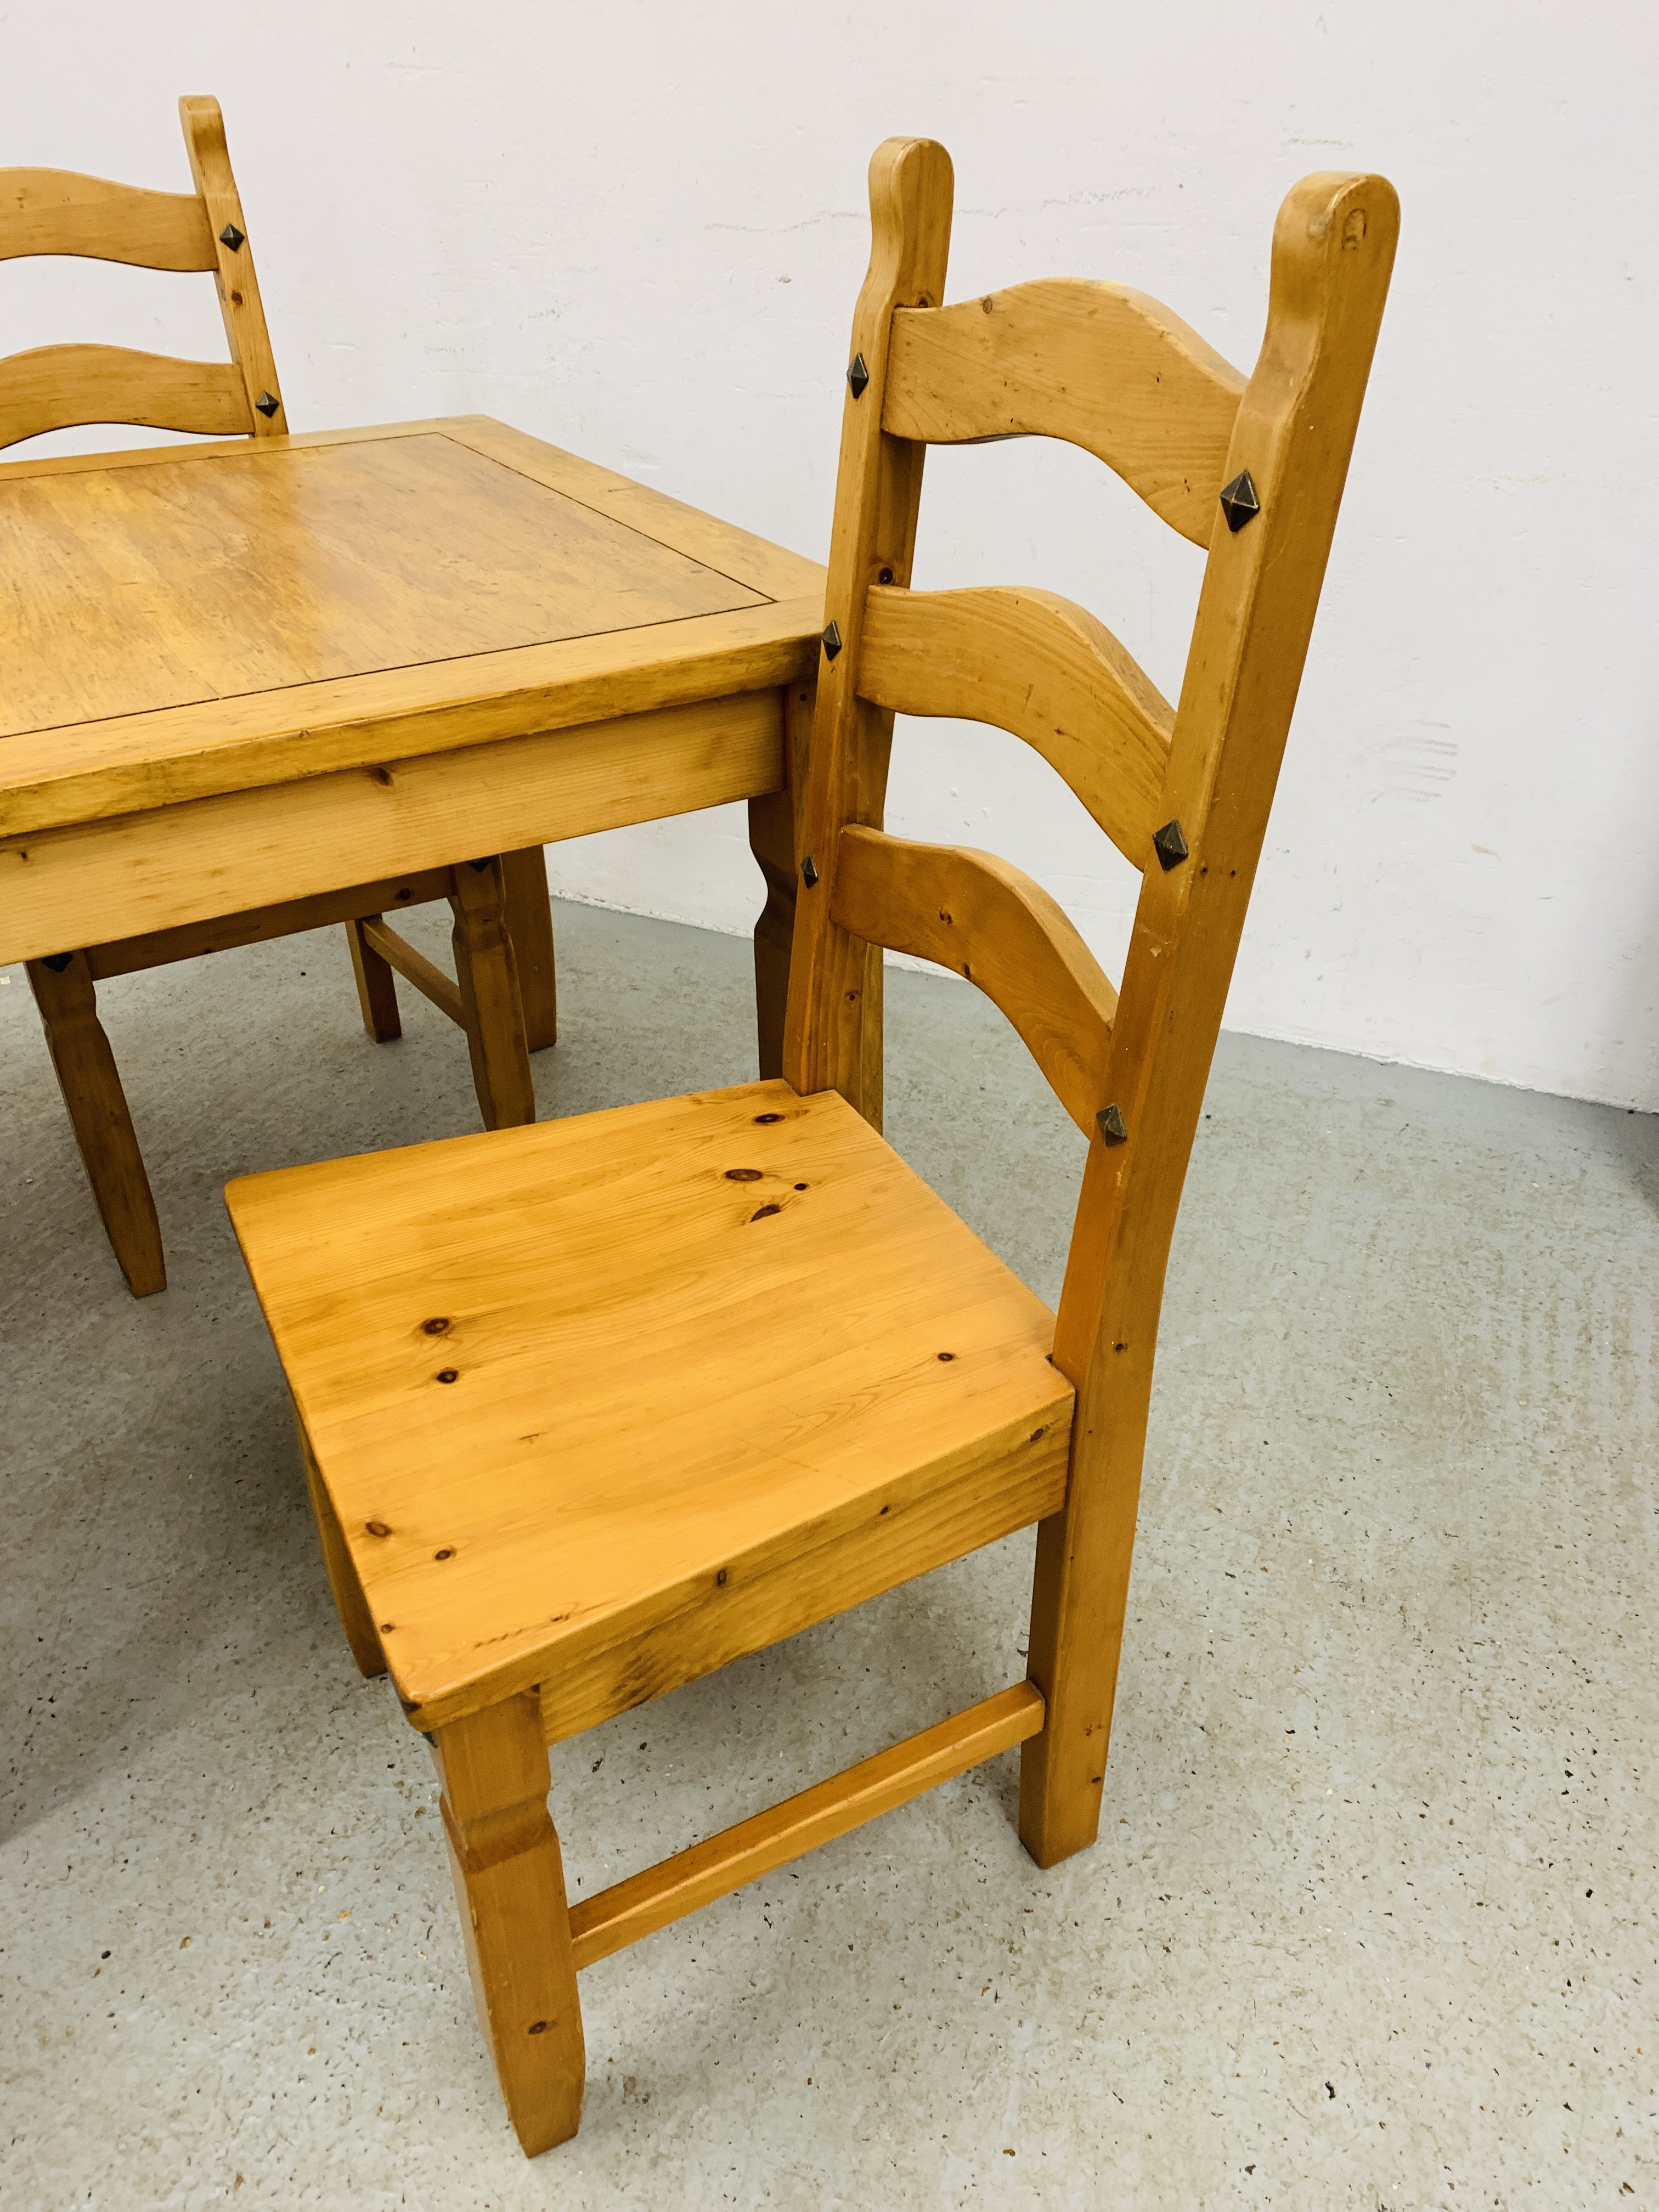 TRADITIONAL PINE KITCHEN / DINING TABLE AND 4 MATCHING CHAIRS (ORIGINALLY FROM "HOVELS") - Image 4 of 10